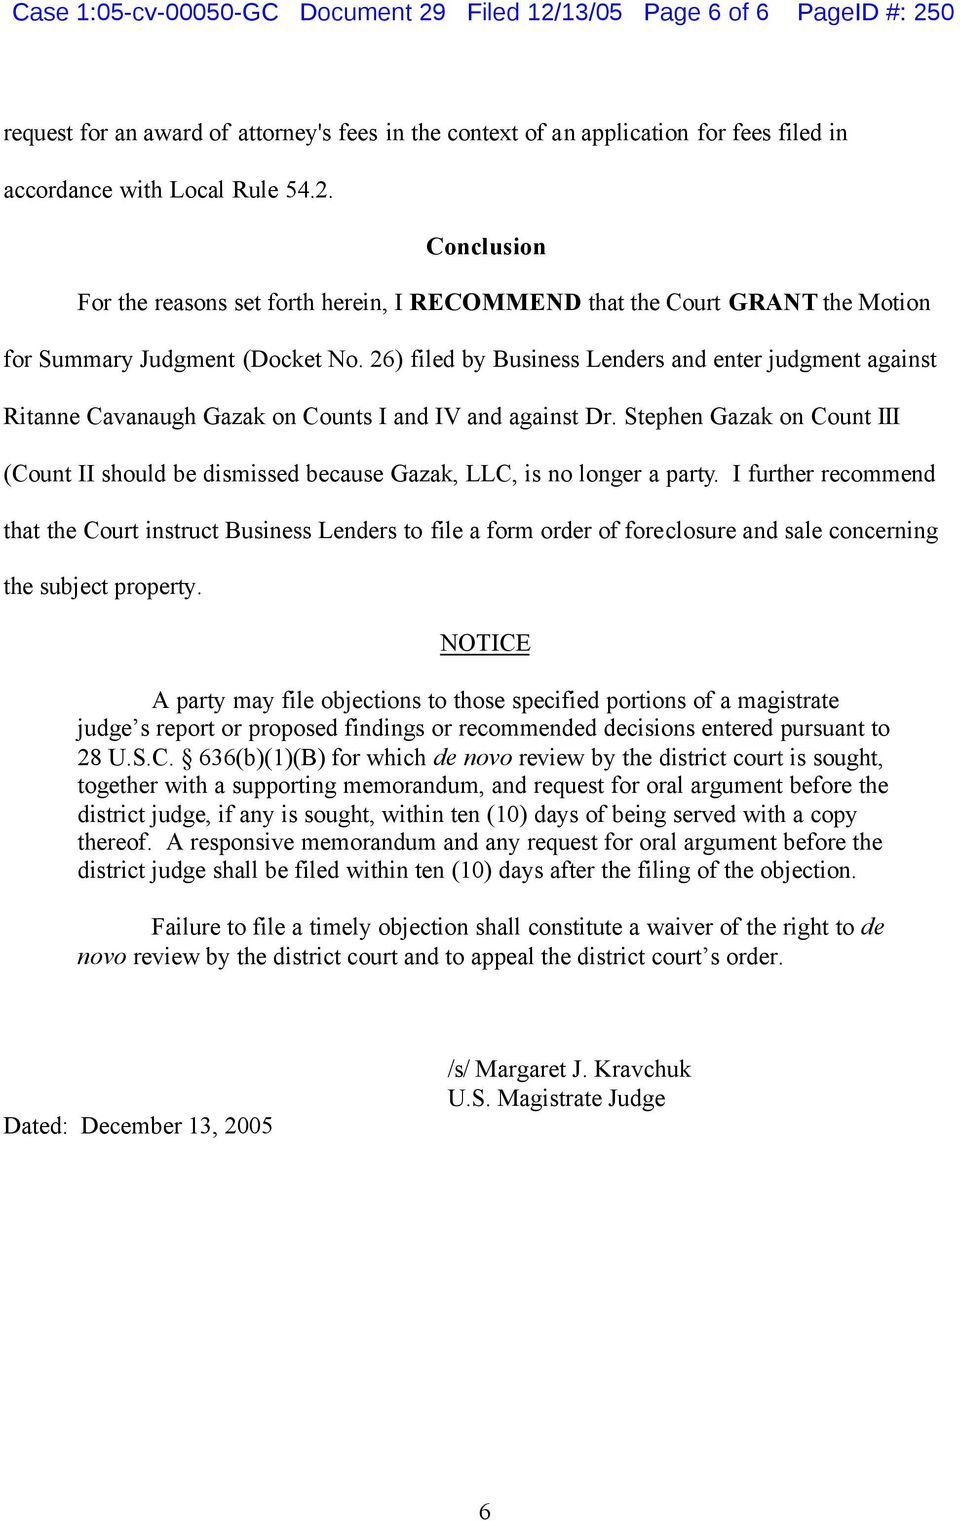 Stephen Gazak on Count III (Count II should be dismissed because Gazak, LLC, is no longer a party.